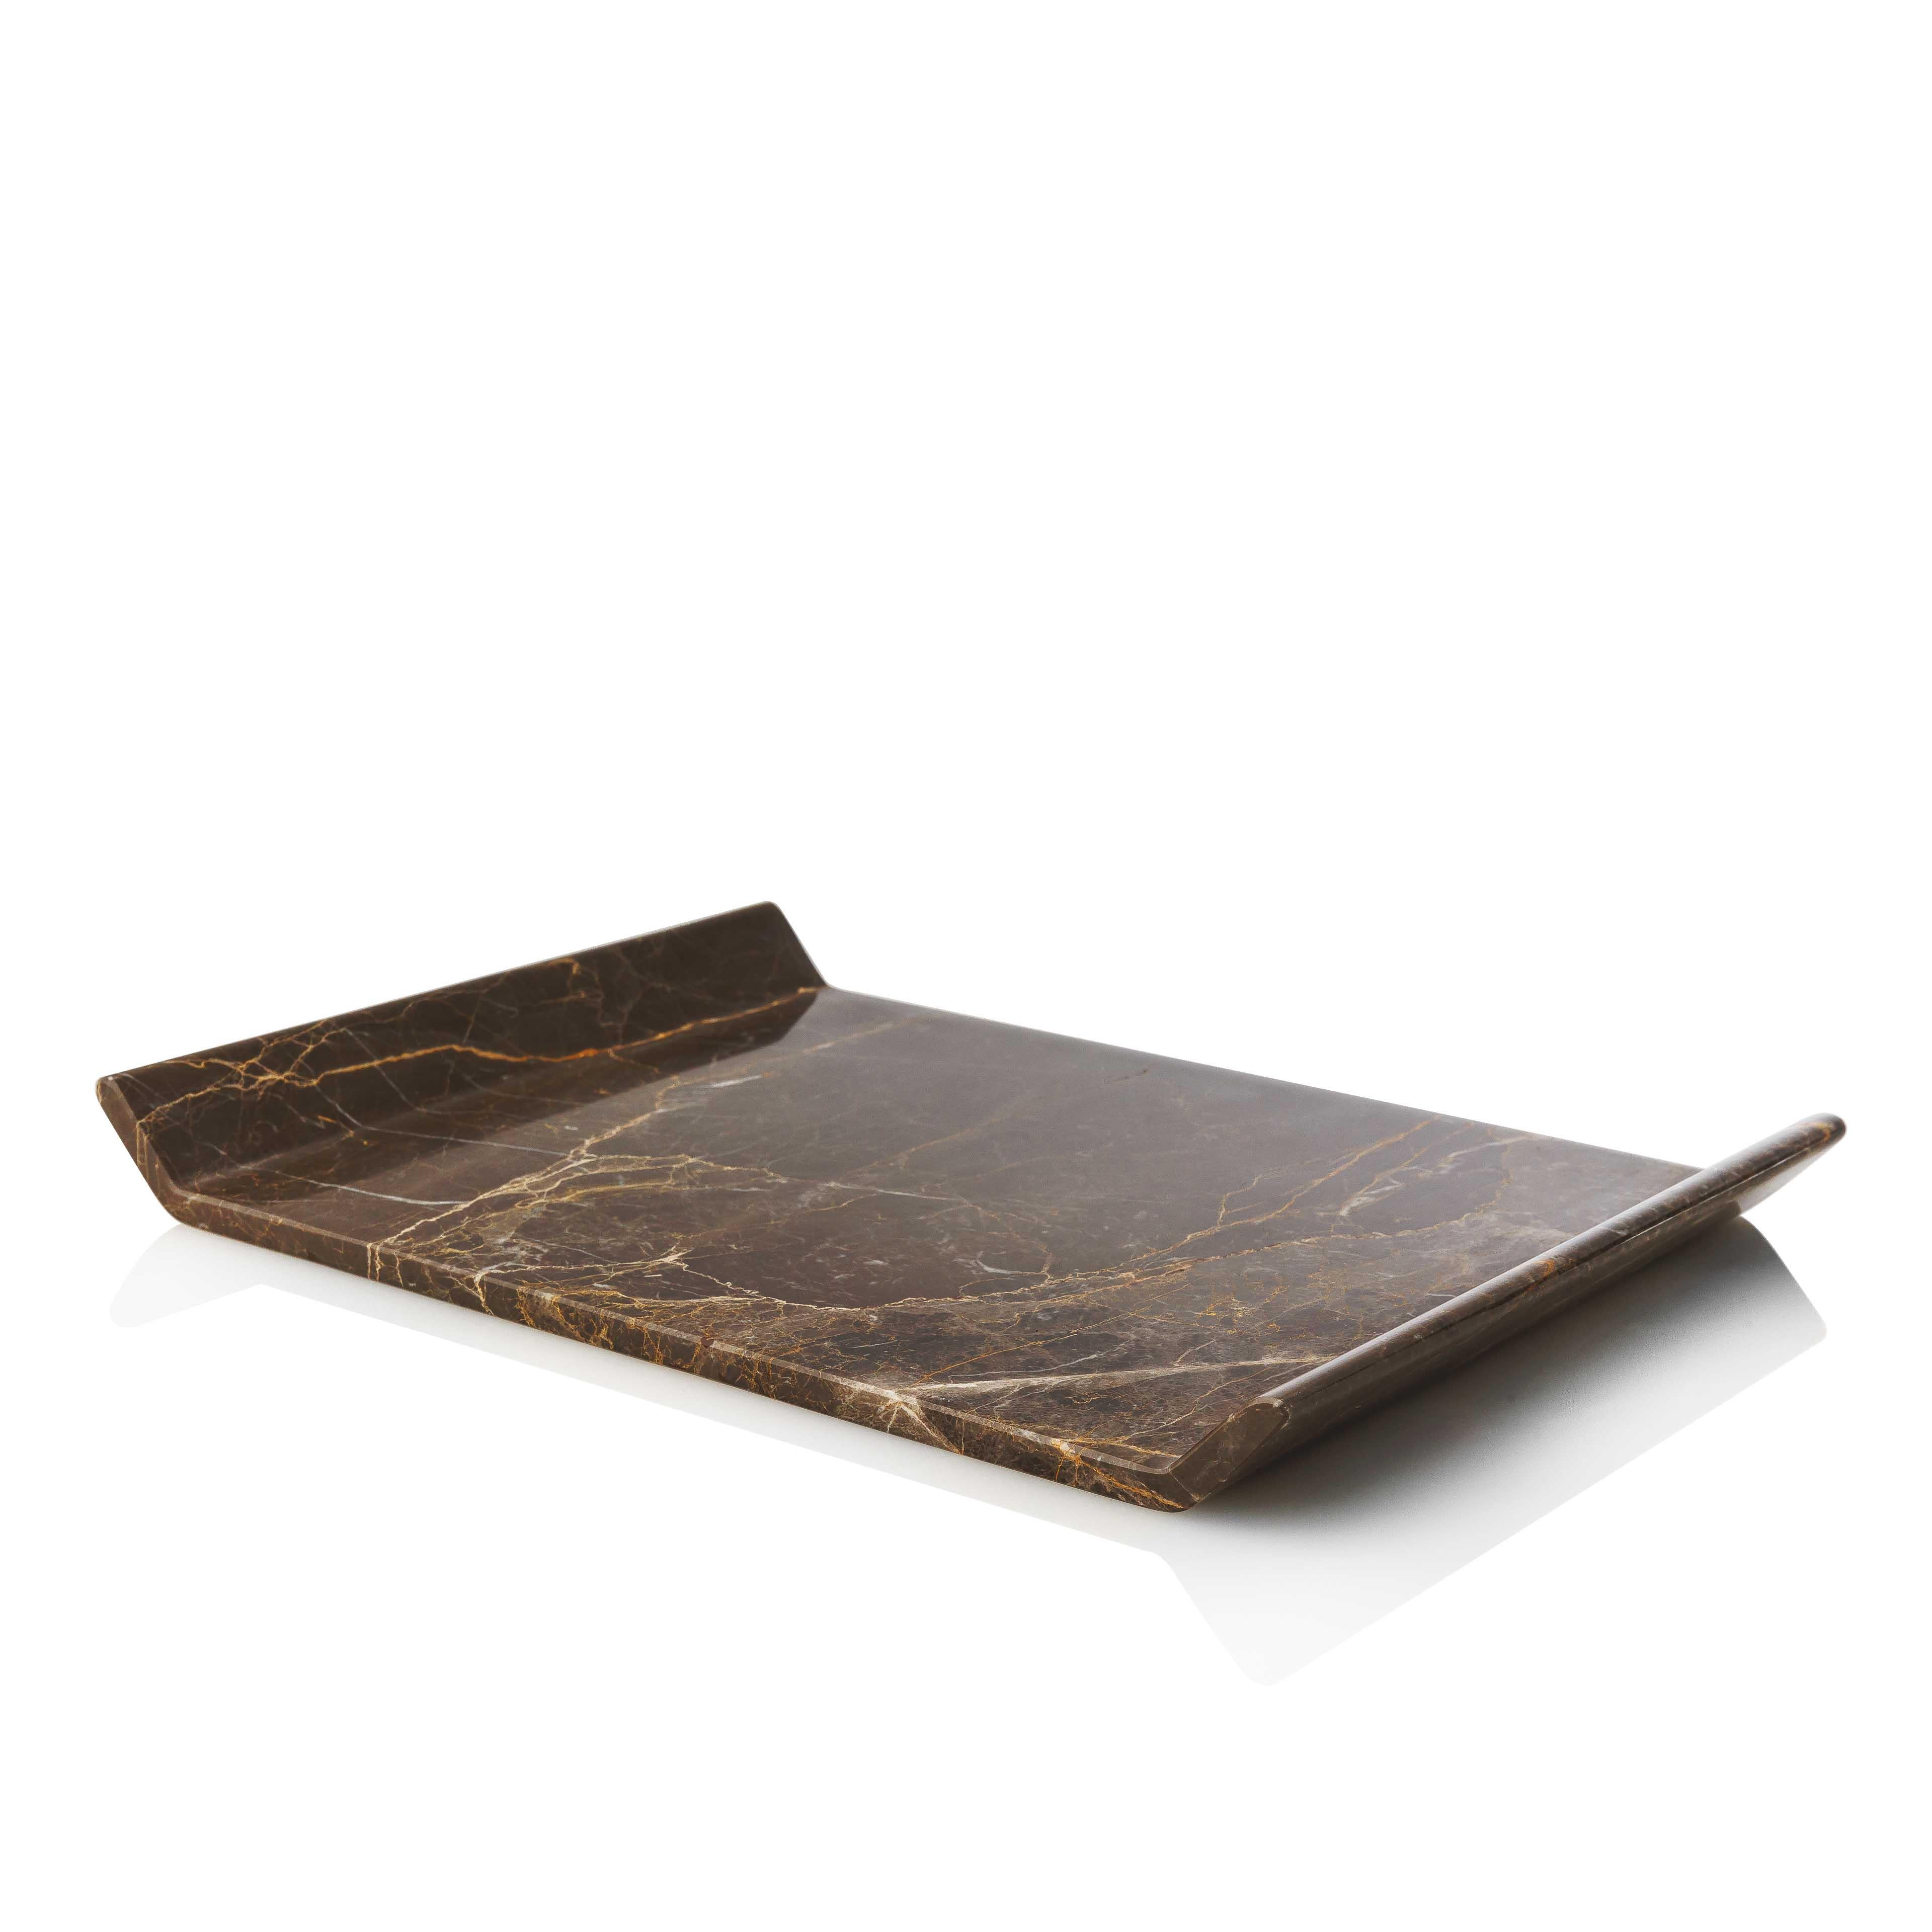 This platter is designed as a homogeneous volume, wishing to engage the senses around the plasticity of marble. It is carved off a single piece of marble without joints or seams.

Io platter has a fine mat finish, revealing the unique color and